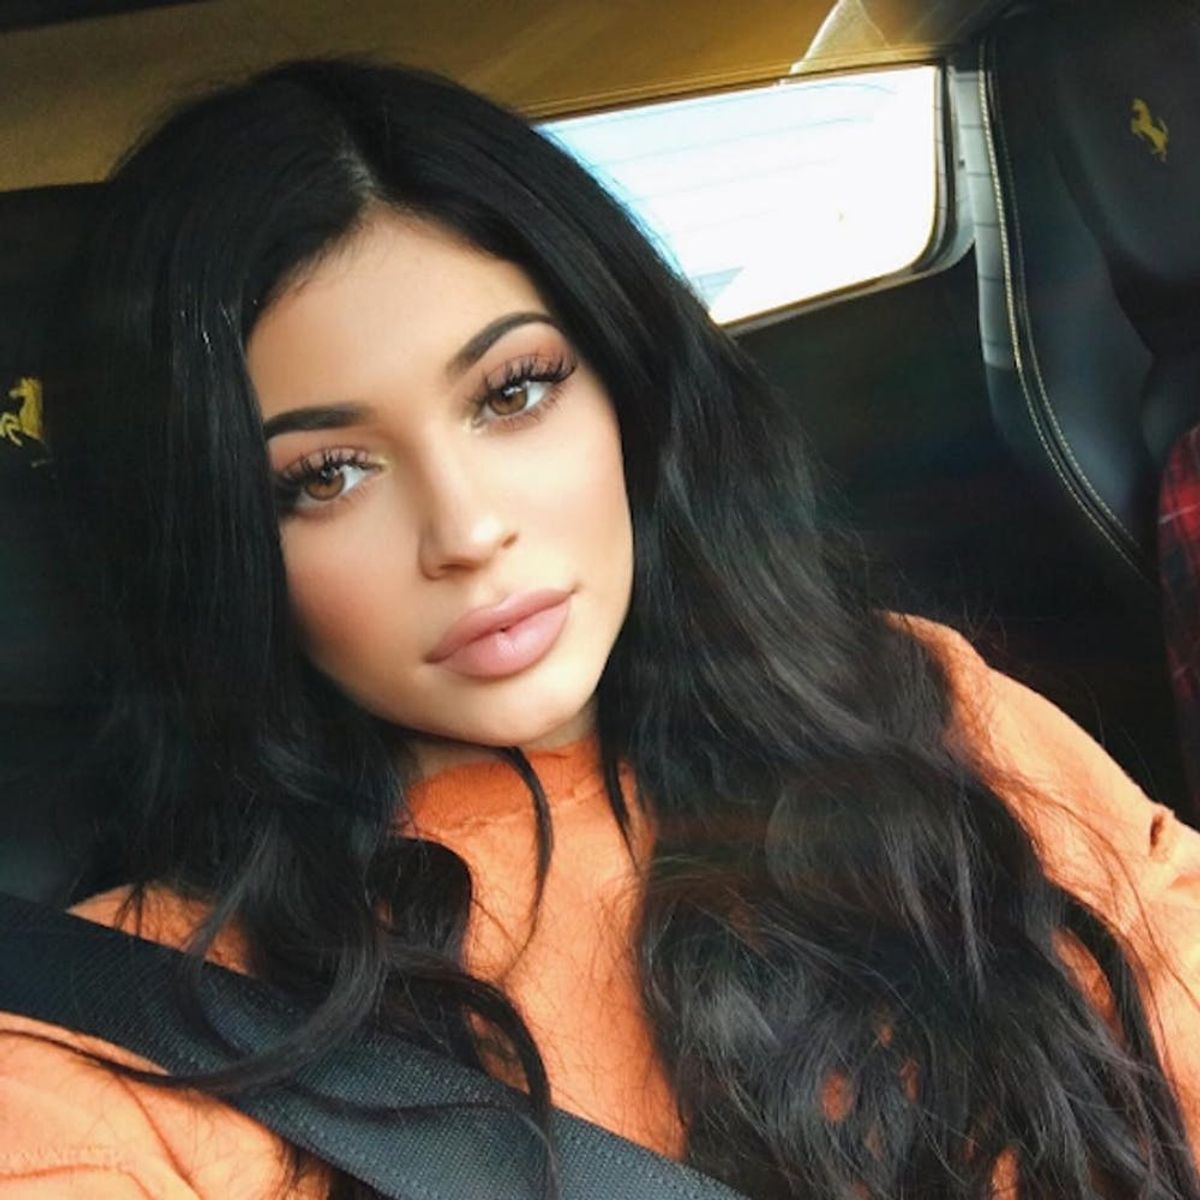 Did Kylie Jenner Get Her Lips Reduced?